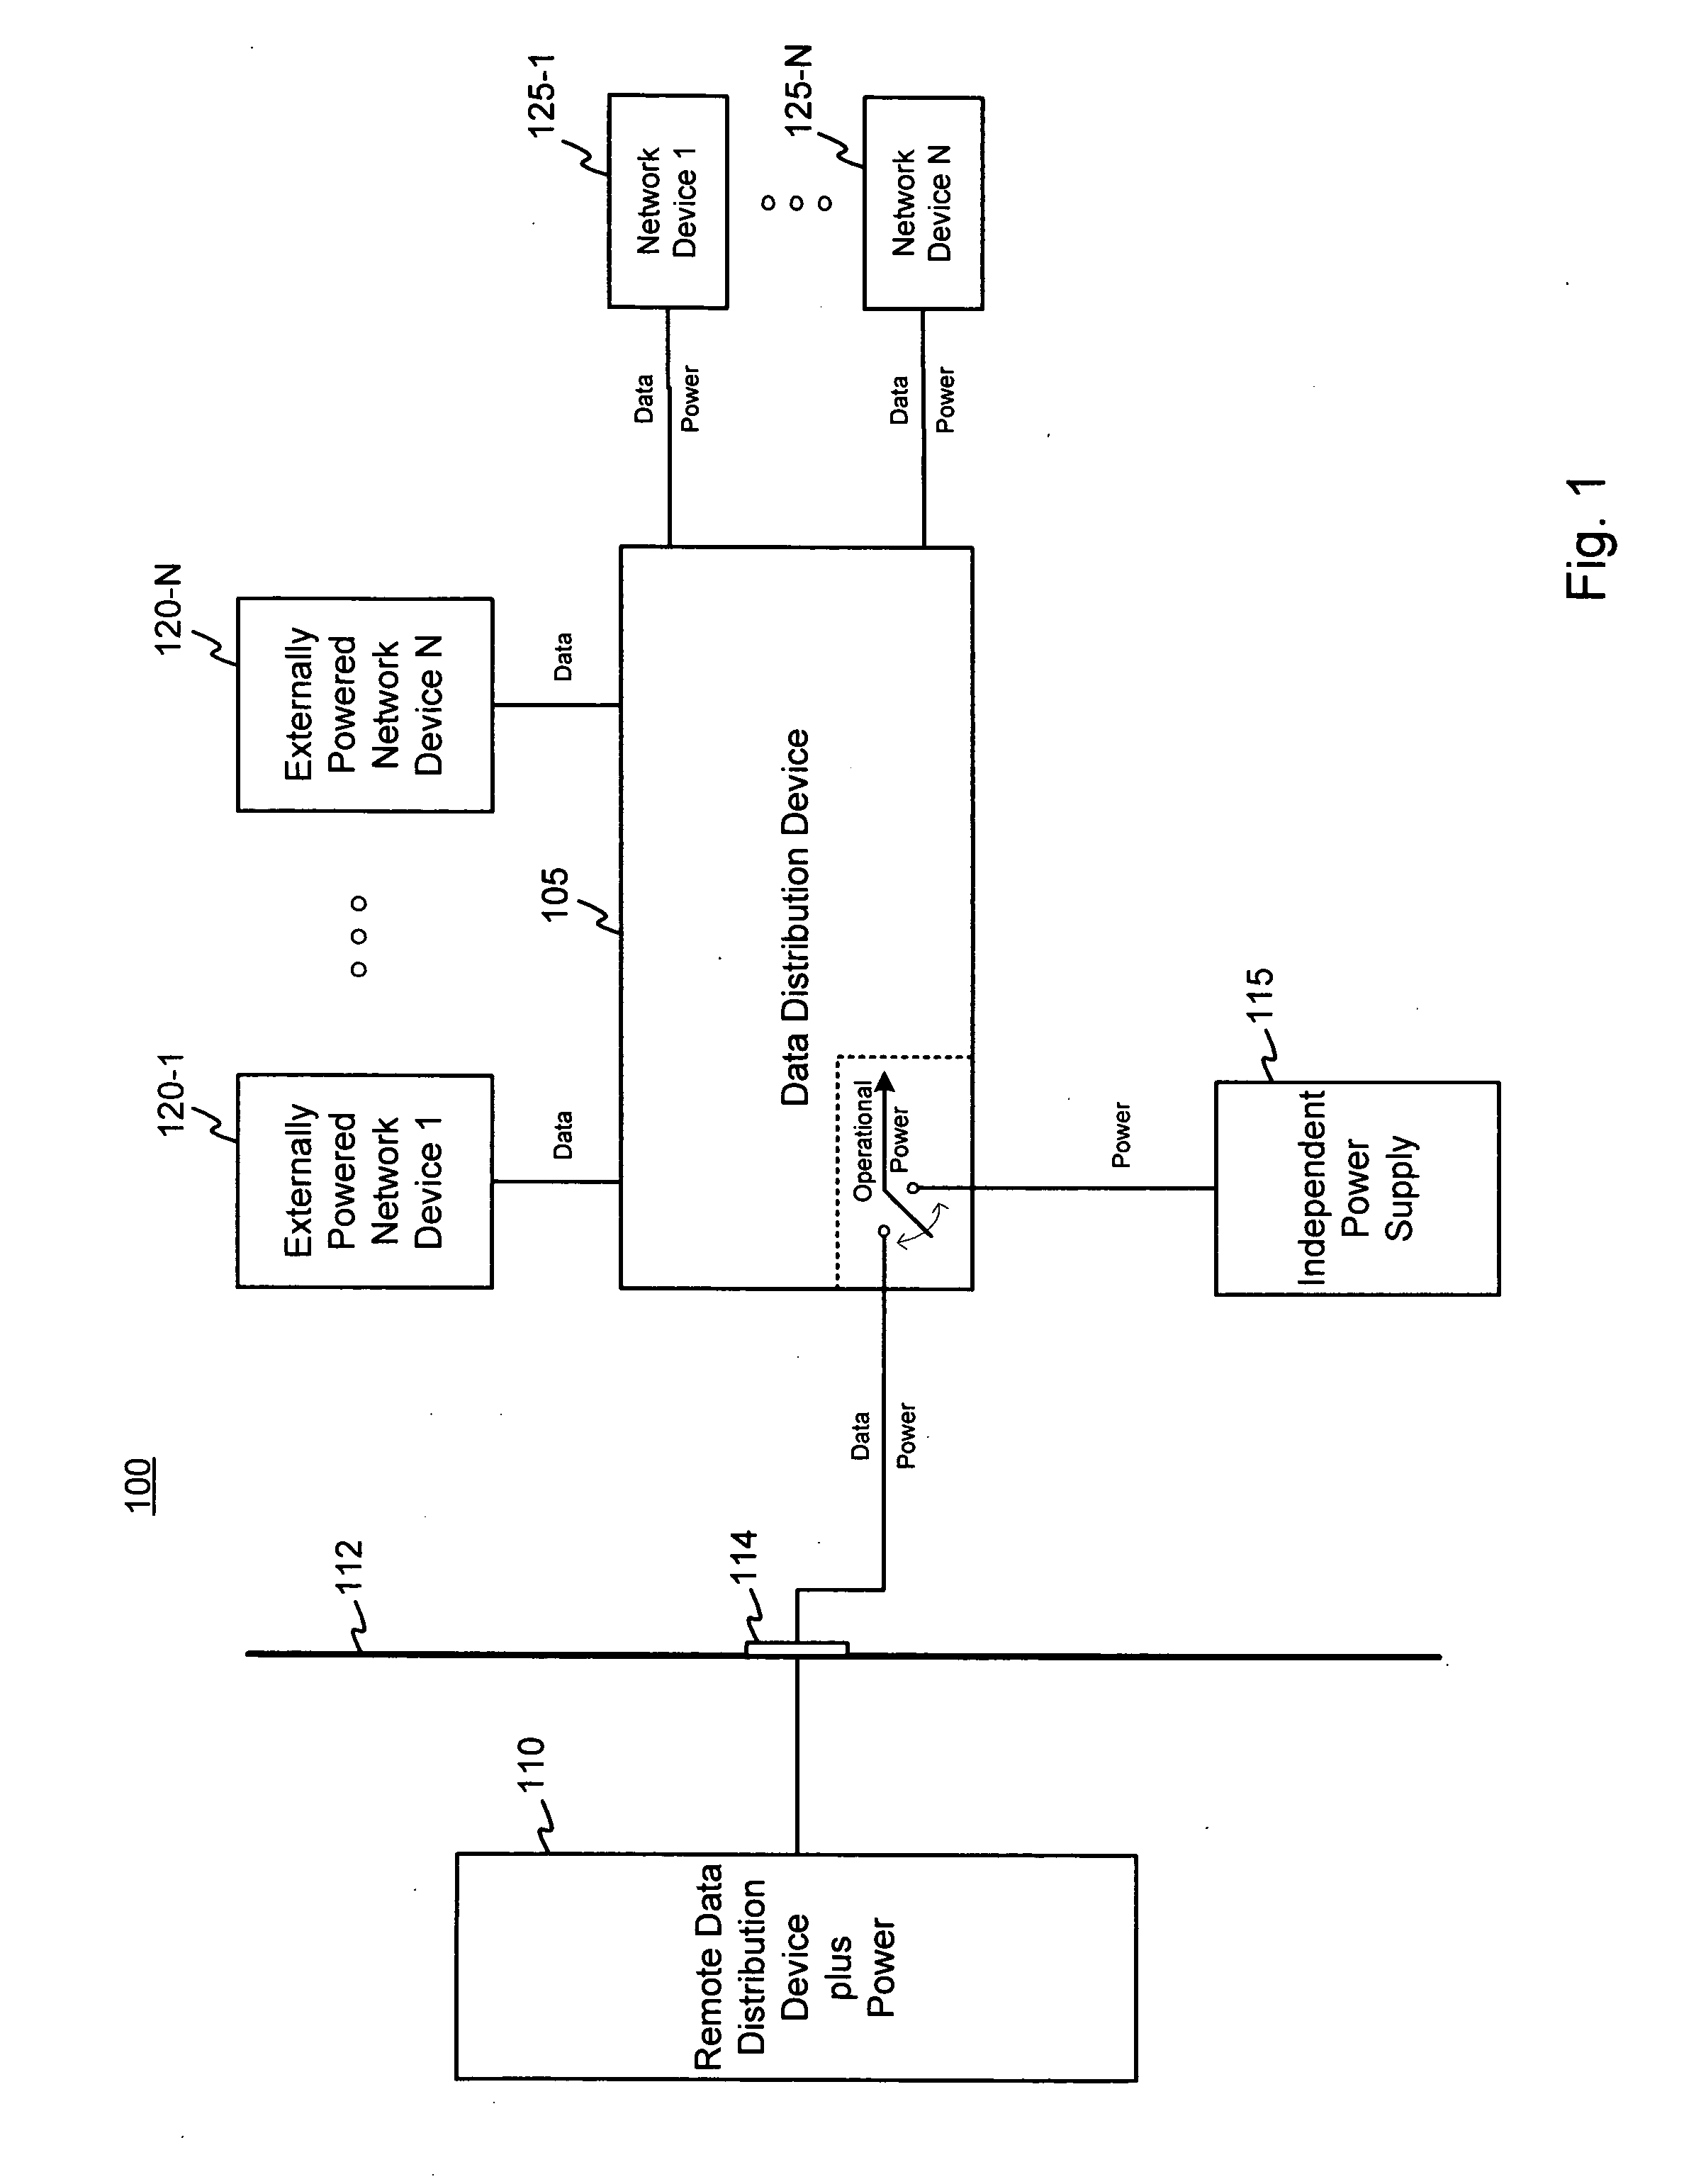 Apparatus and methods for data distribution devices having selectable power supplies